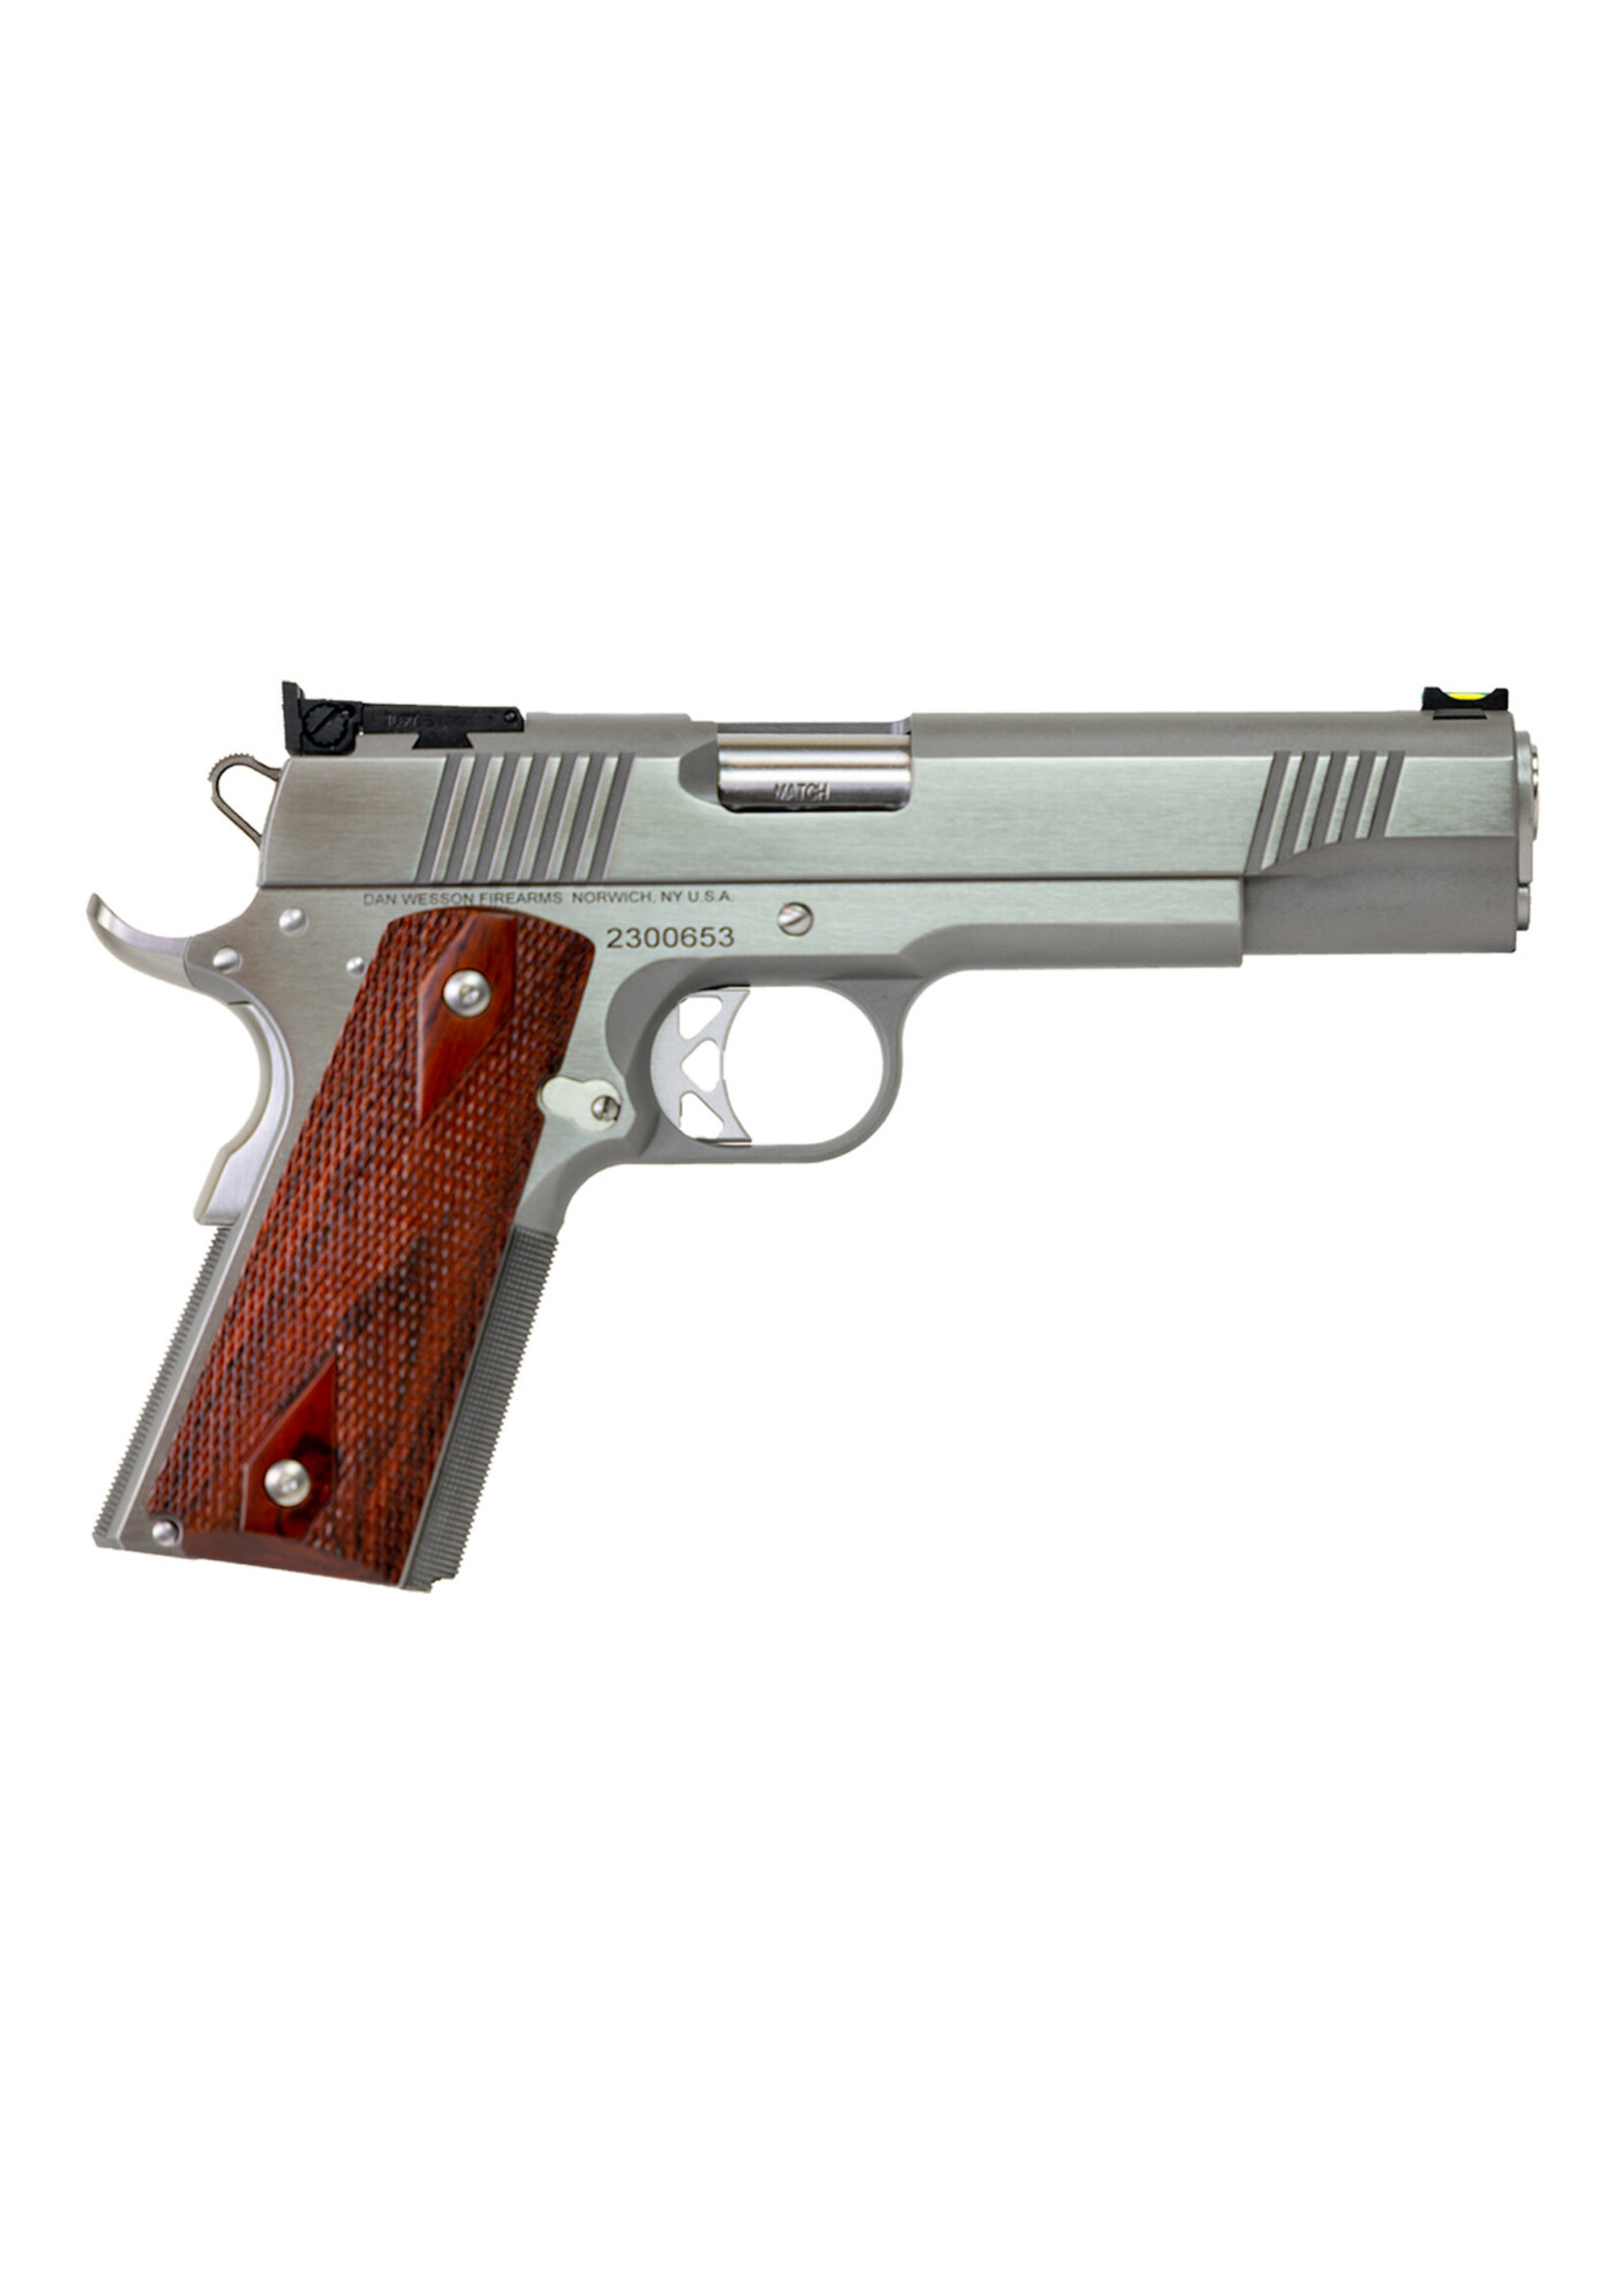 CZ USA / Dan Wesson Dan Wesson 01942 Pointman Nine 9mm Luger 9+1 5" Barrel, Forged Stainless Steel Frame w/Beavertail & Undercut Trigger Guard, Front & Rear Serrated Stainless Steel Slide, Brushed Finish, Double Diamond Cocobolo Grip, Includes 2 Magazines